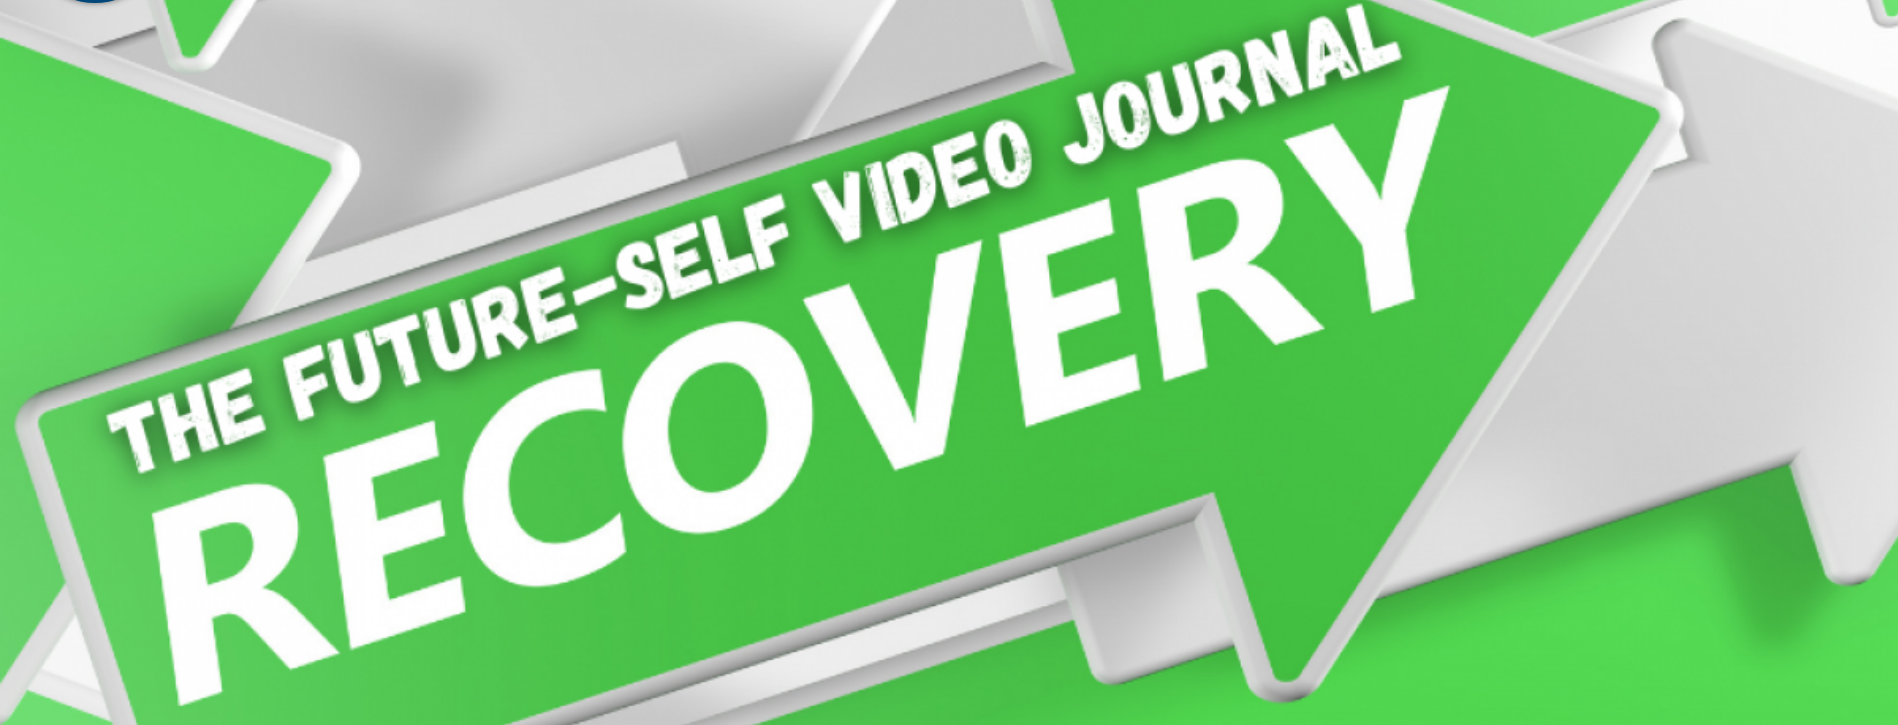 The Future-Self Video Journal For Goal Re-commitment In Recovery Program